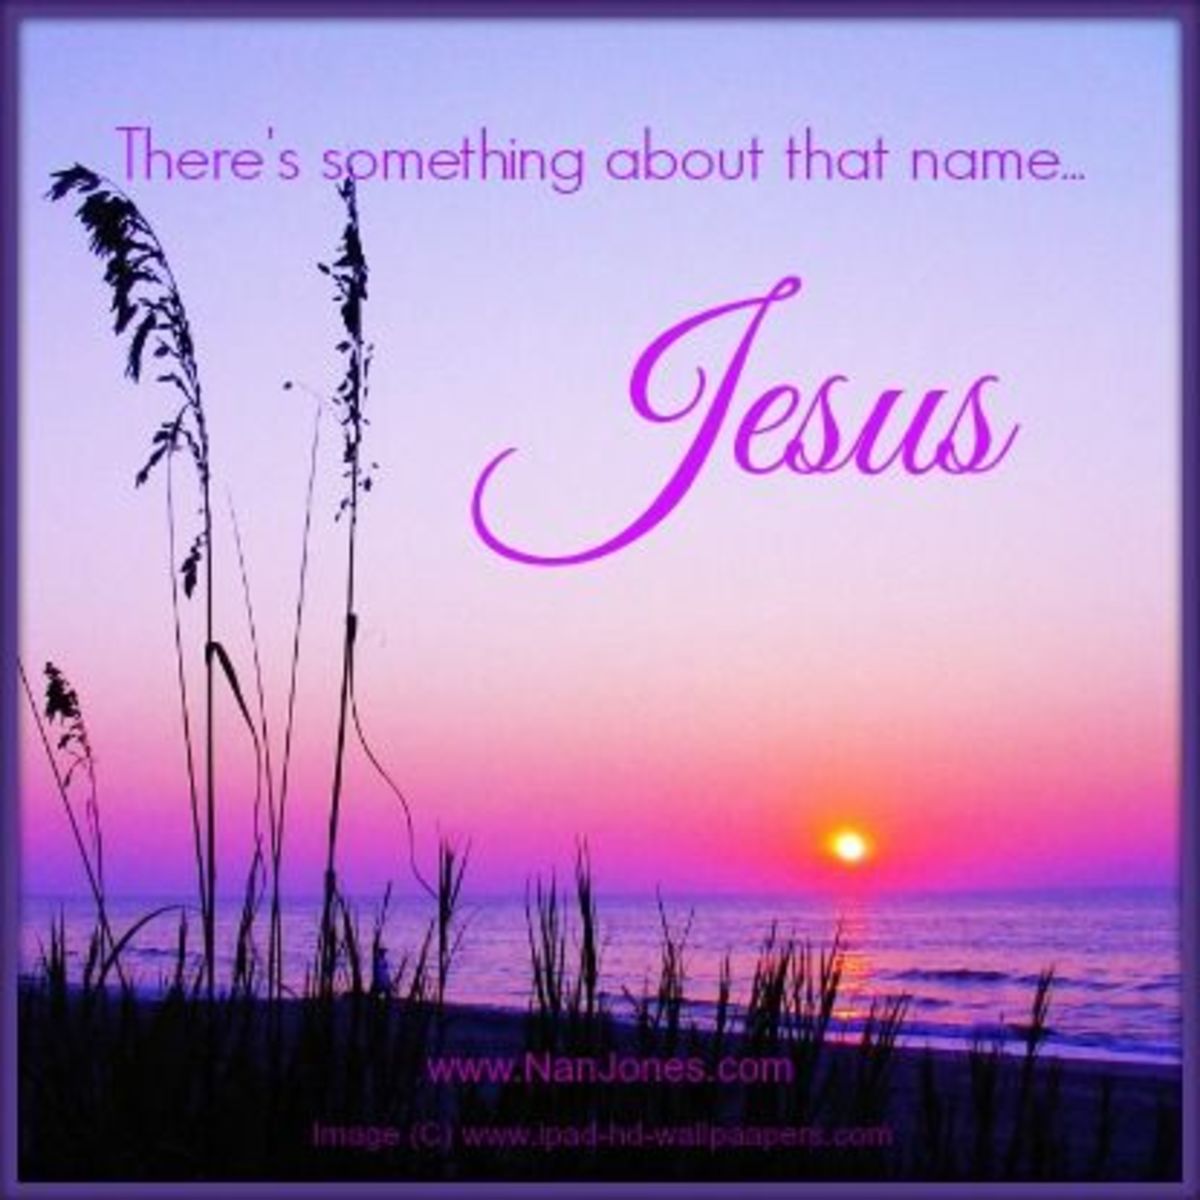 jesus-something-special-supernatural-about-your-name